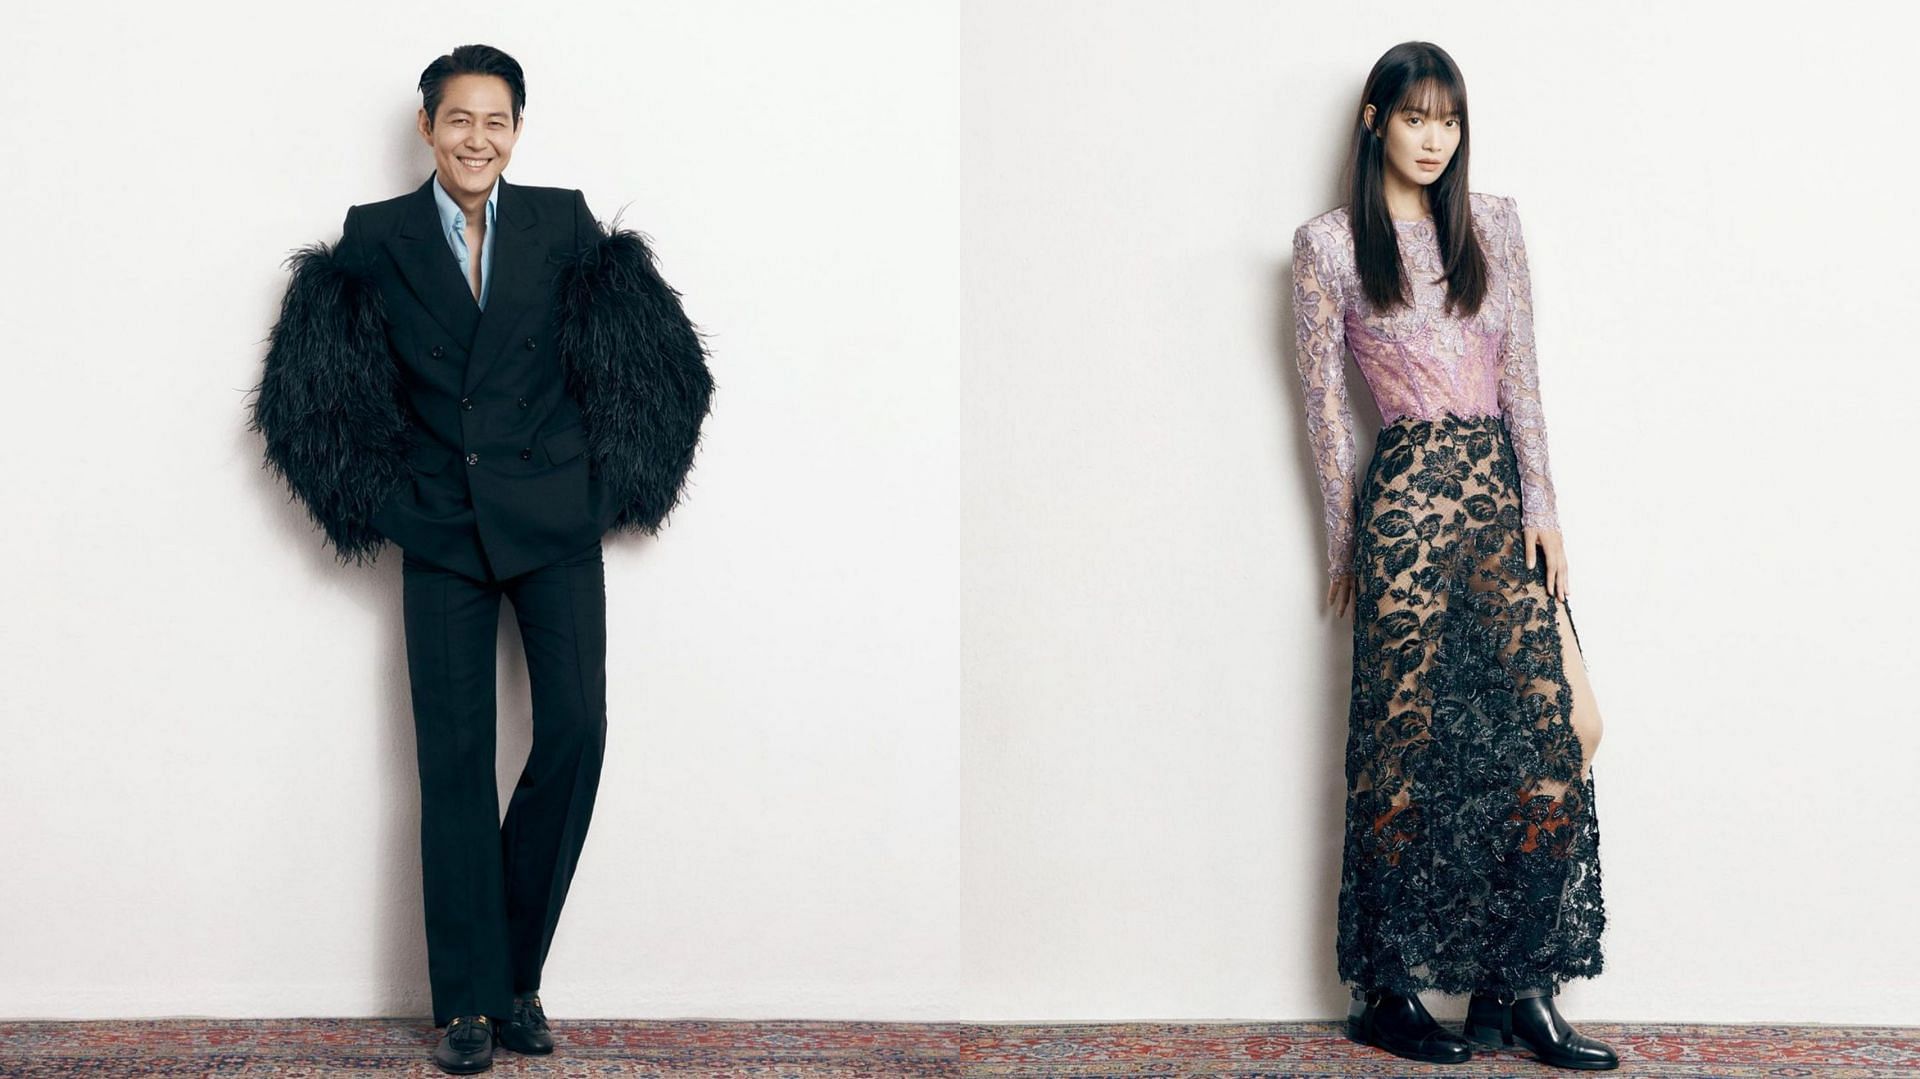 Lee Jung Jae and Shin Min Ah are riding high on recent successes. (Image via Instagram/@illusomina and @from_jjlee)